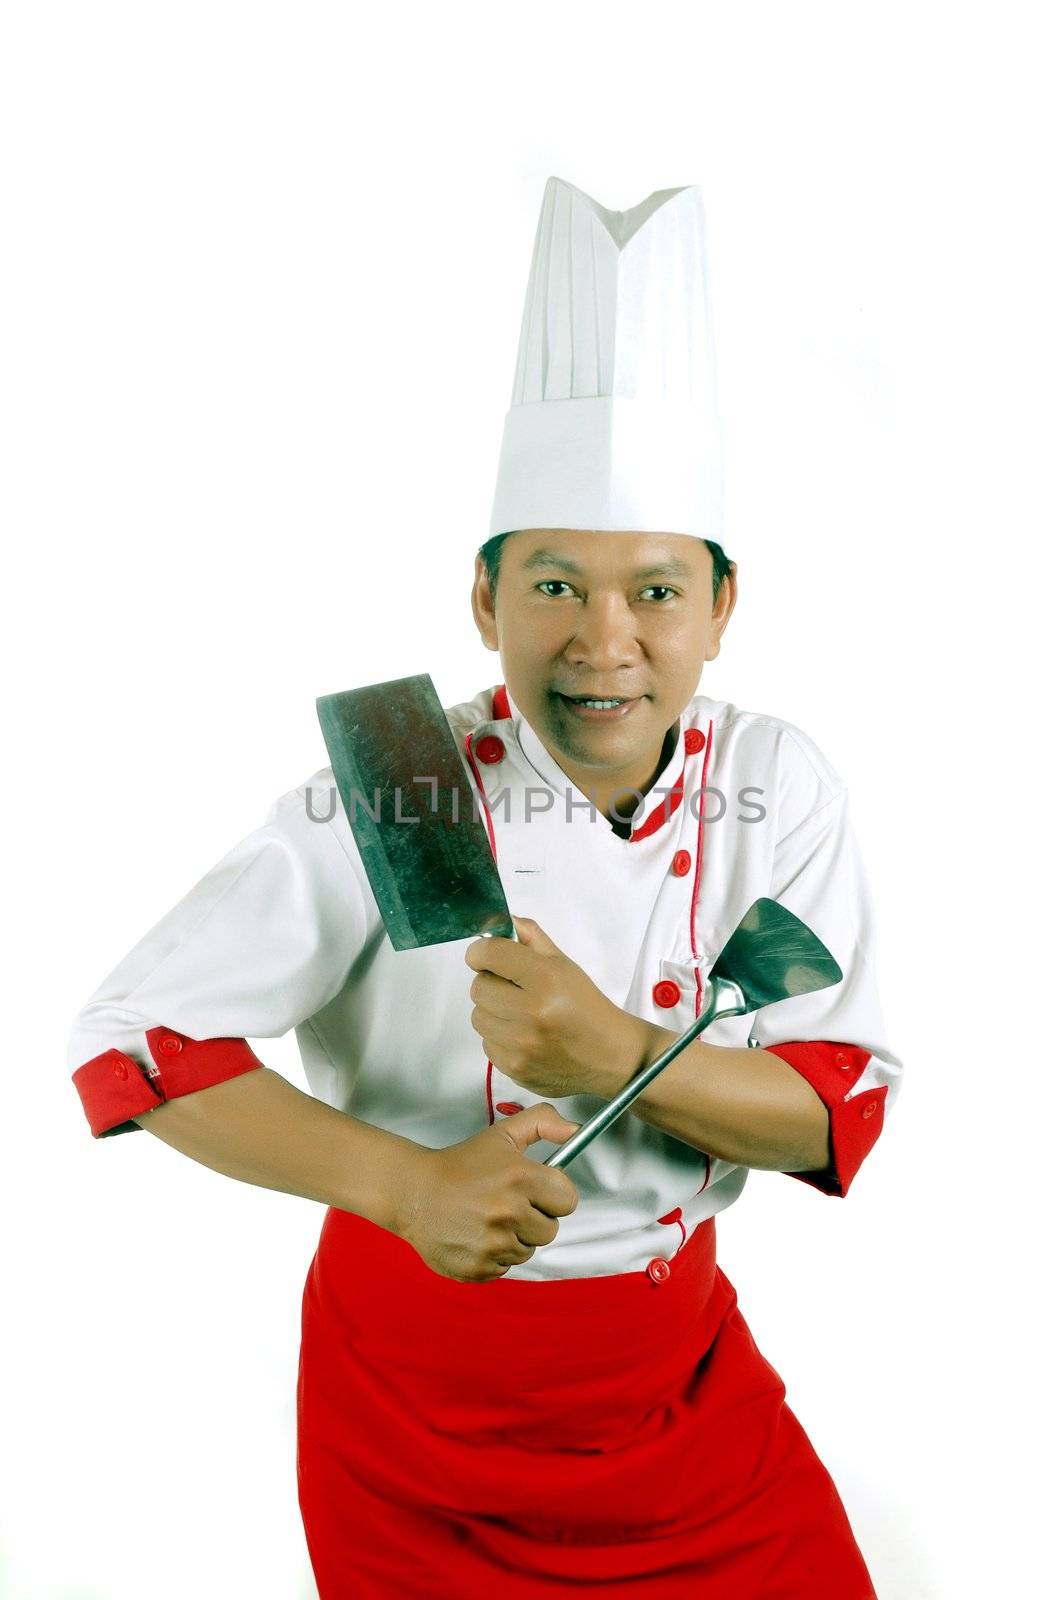 chef holding cooking utensils and kitchen knife by antonihalim